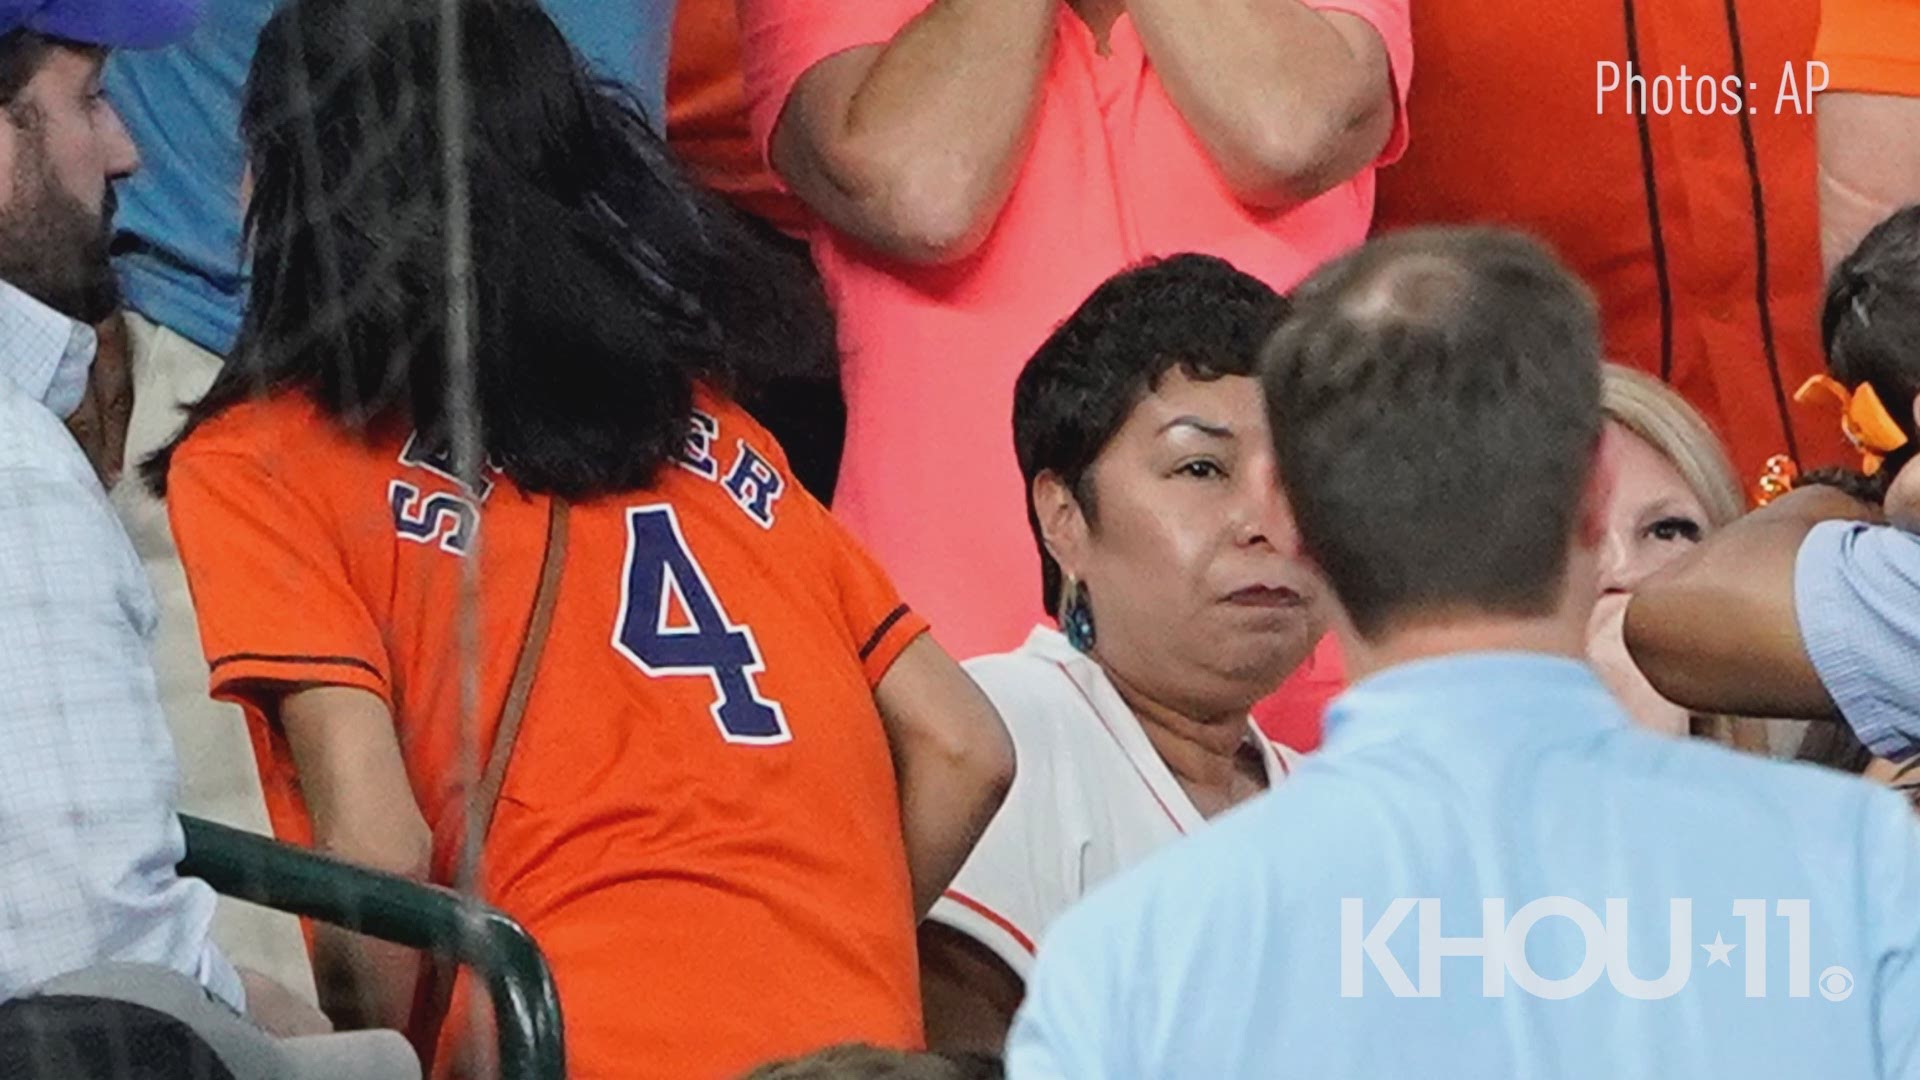 Young girl hit by foul ball at AstrosCubs game at Minute Maid Park